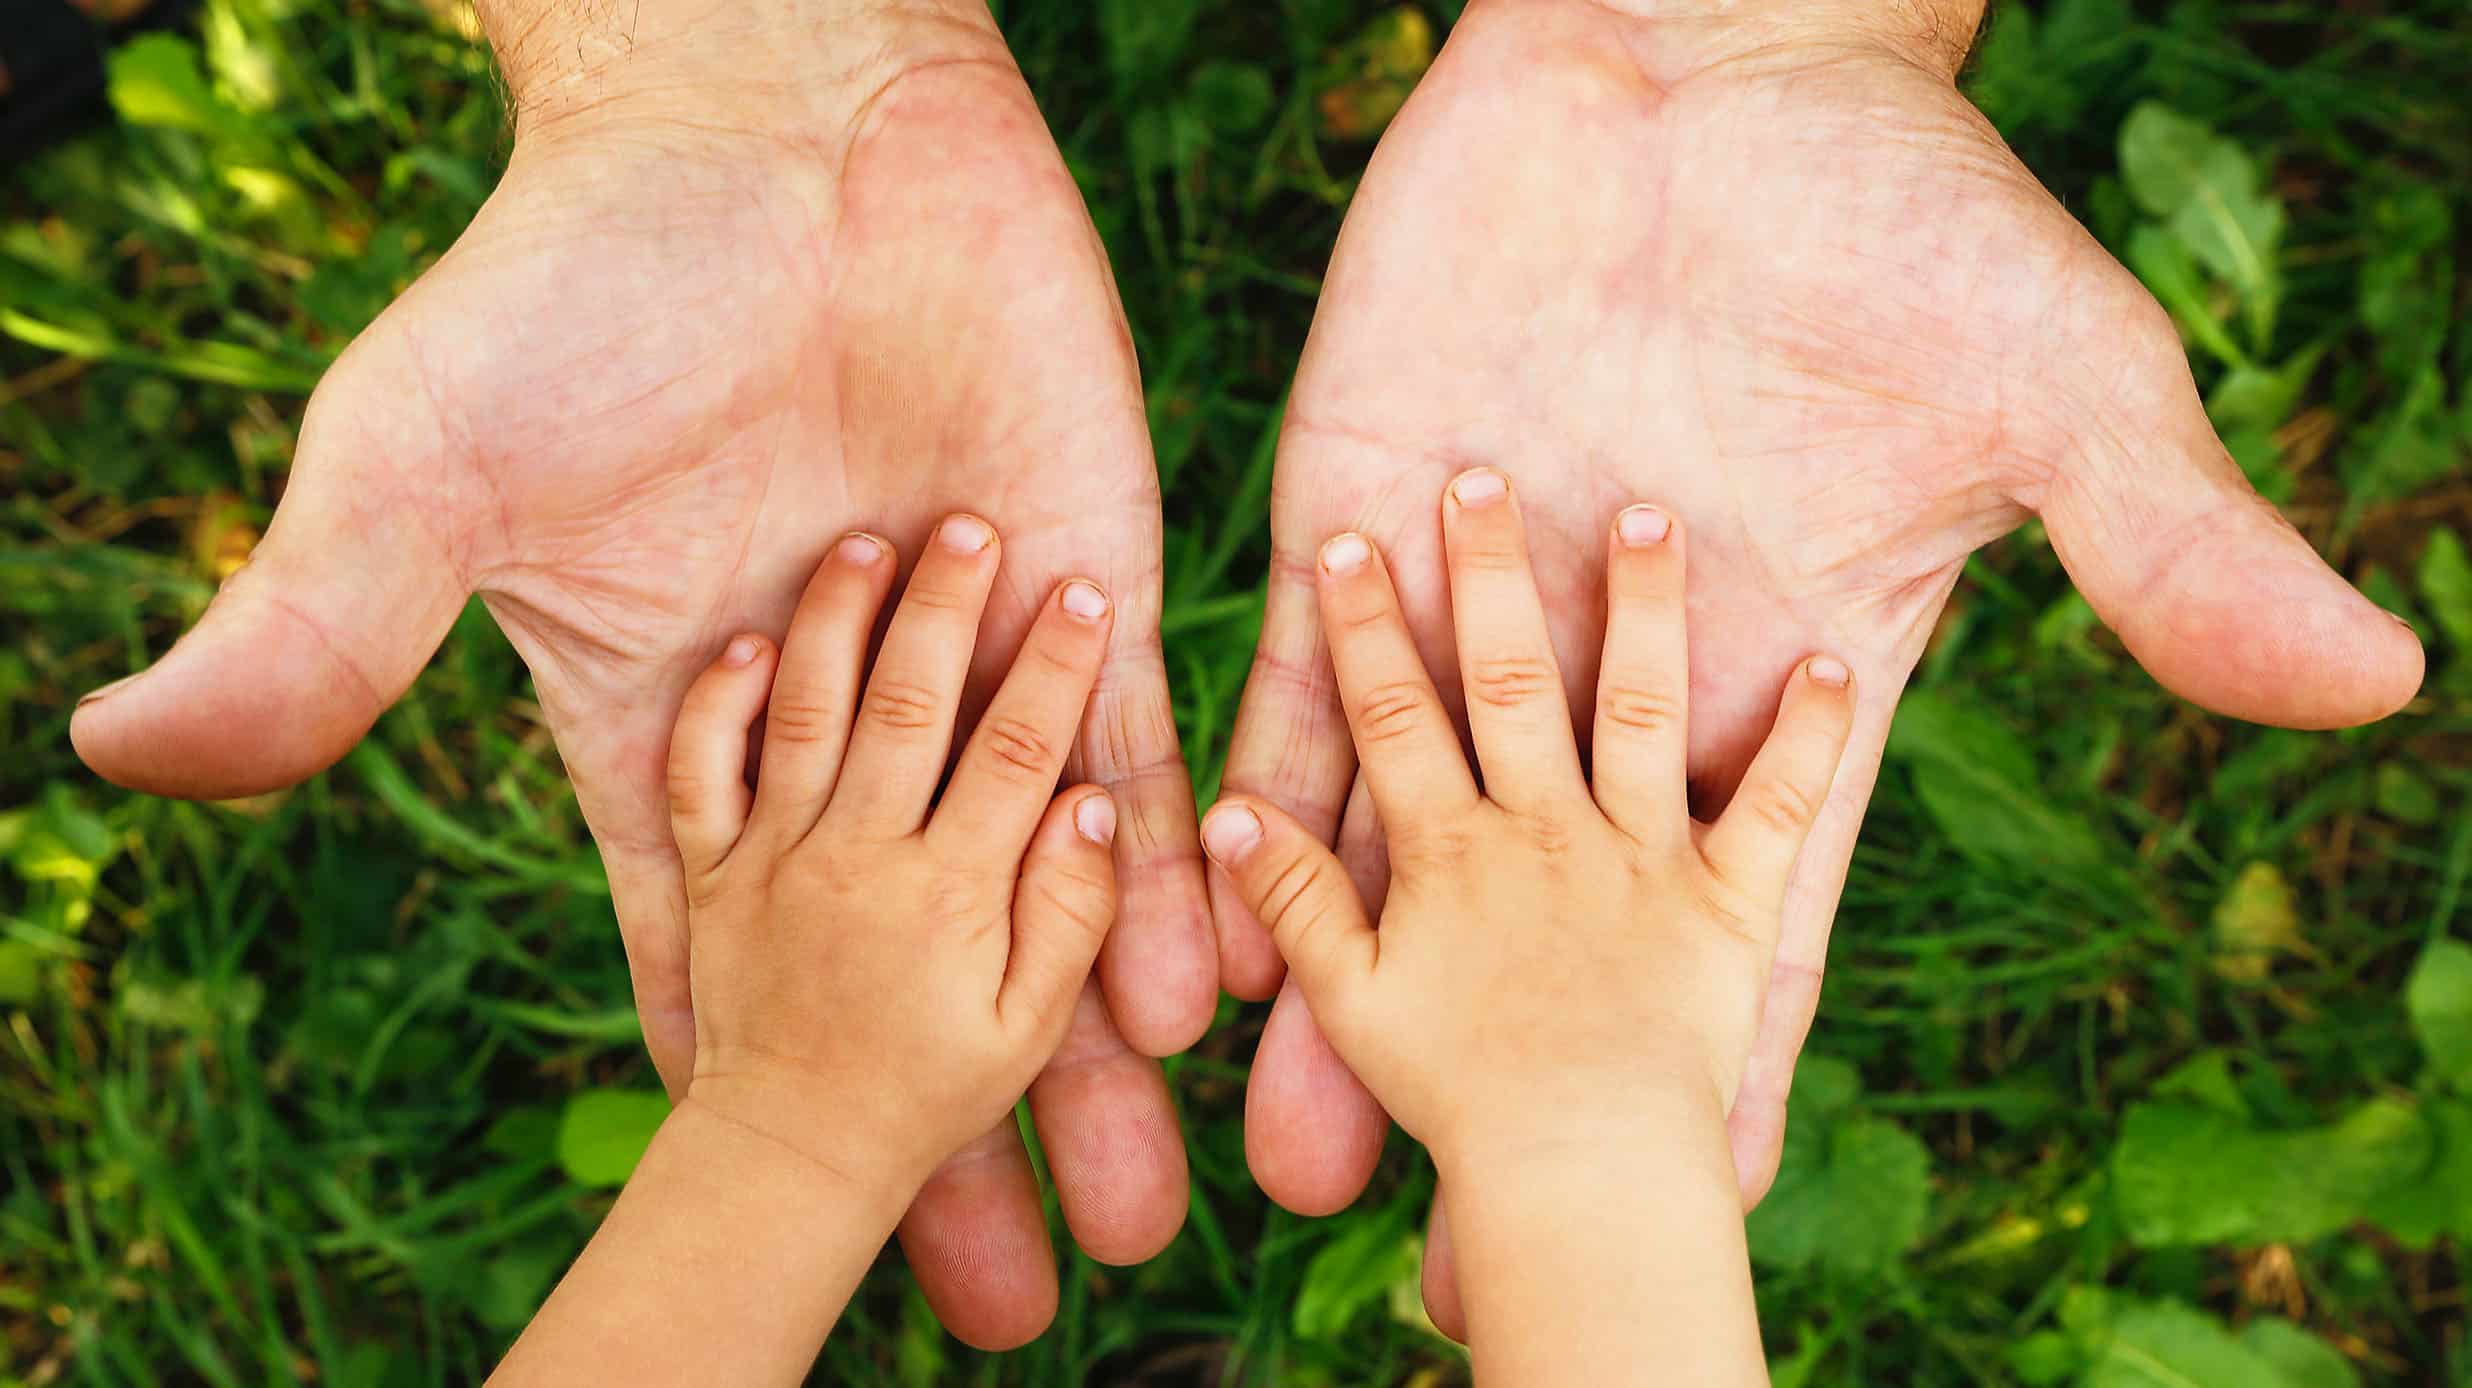 A child put their hands in their parent's hands - The Impacts of Parental Substance Abuse On Children